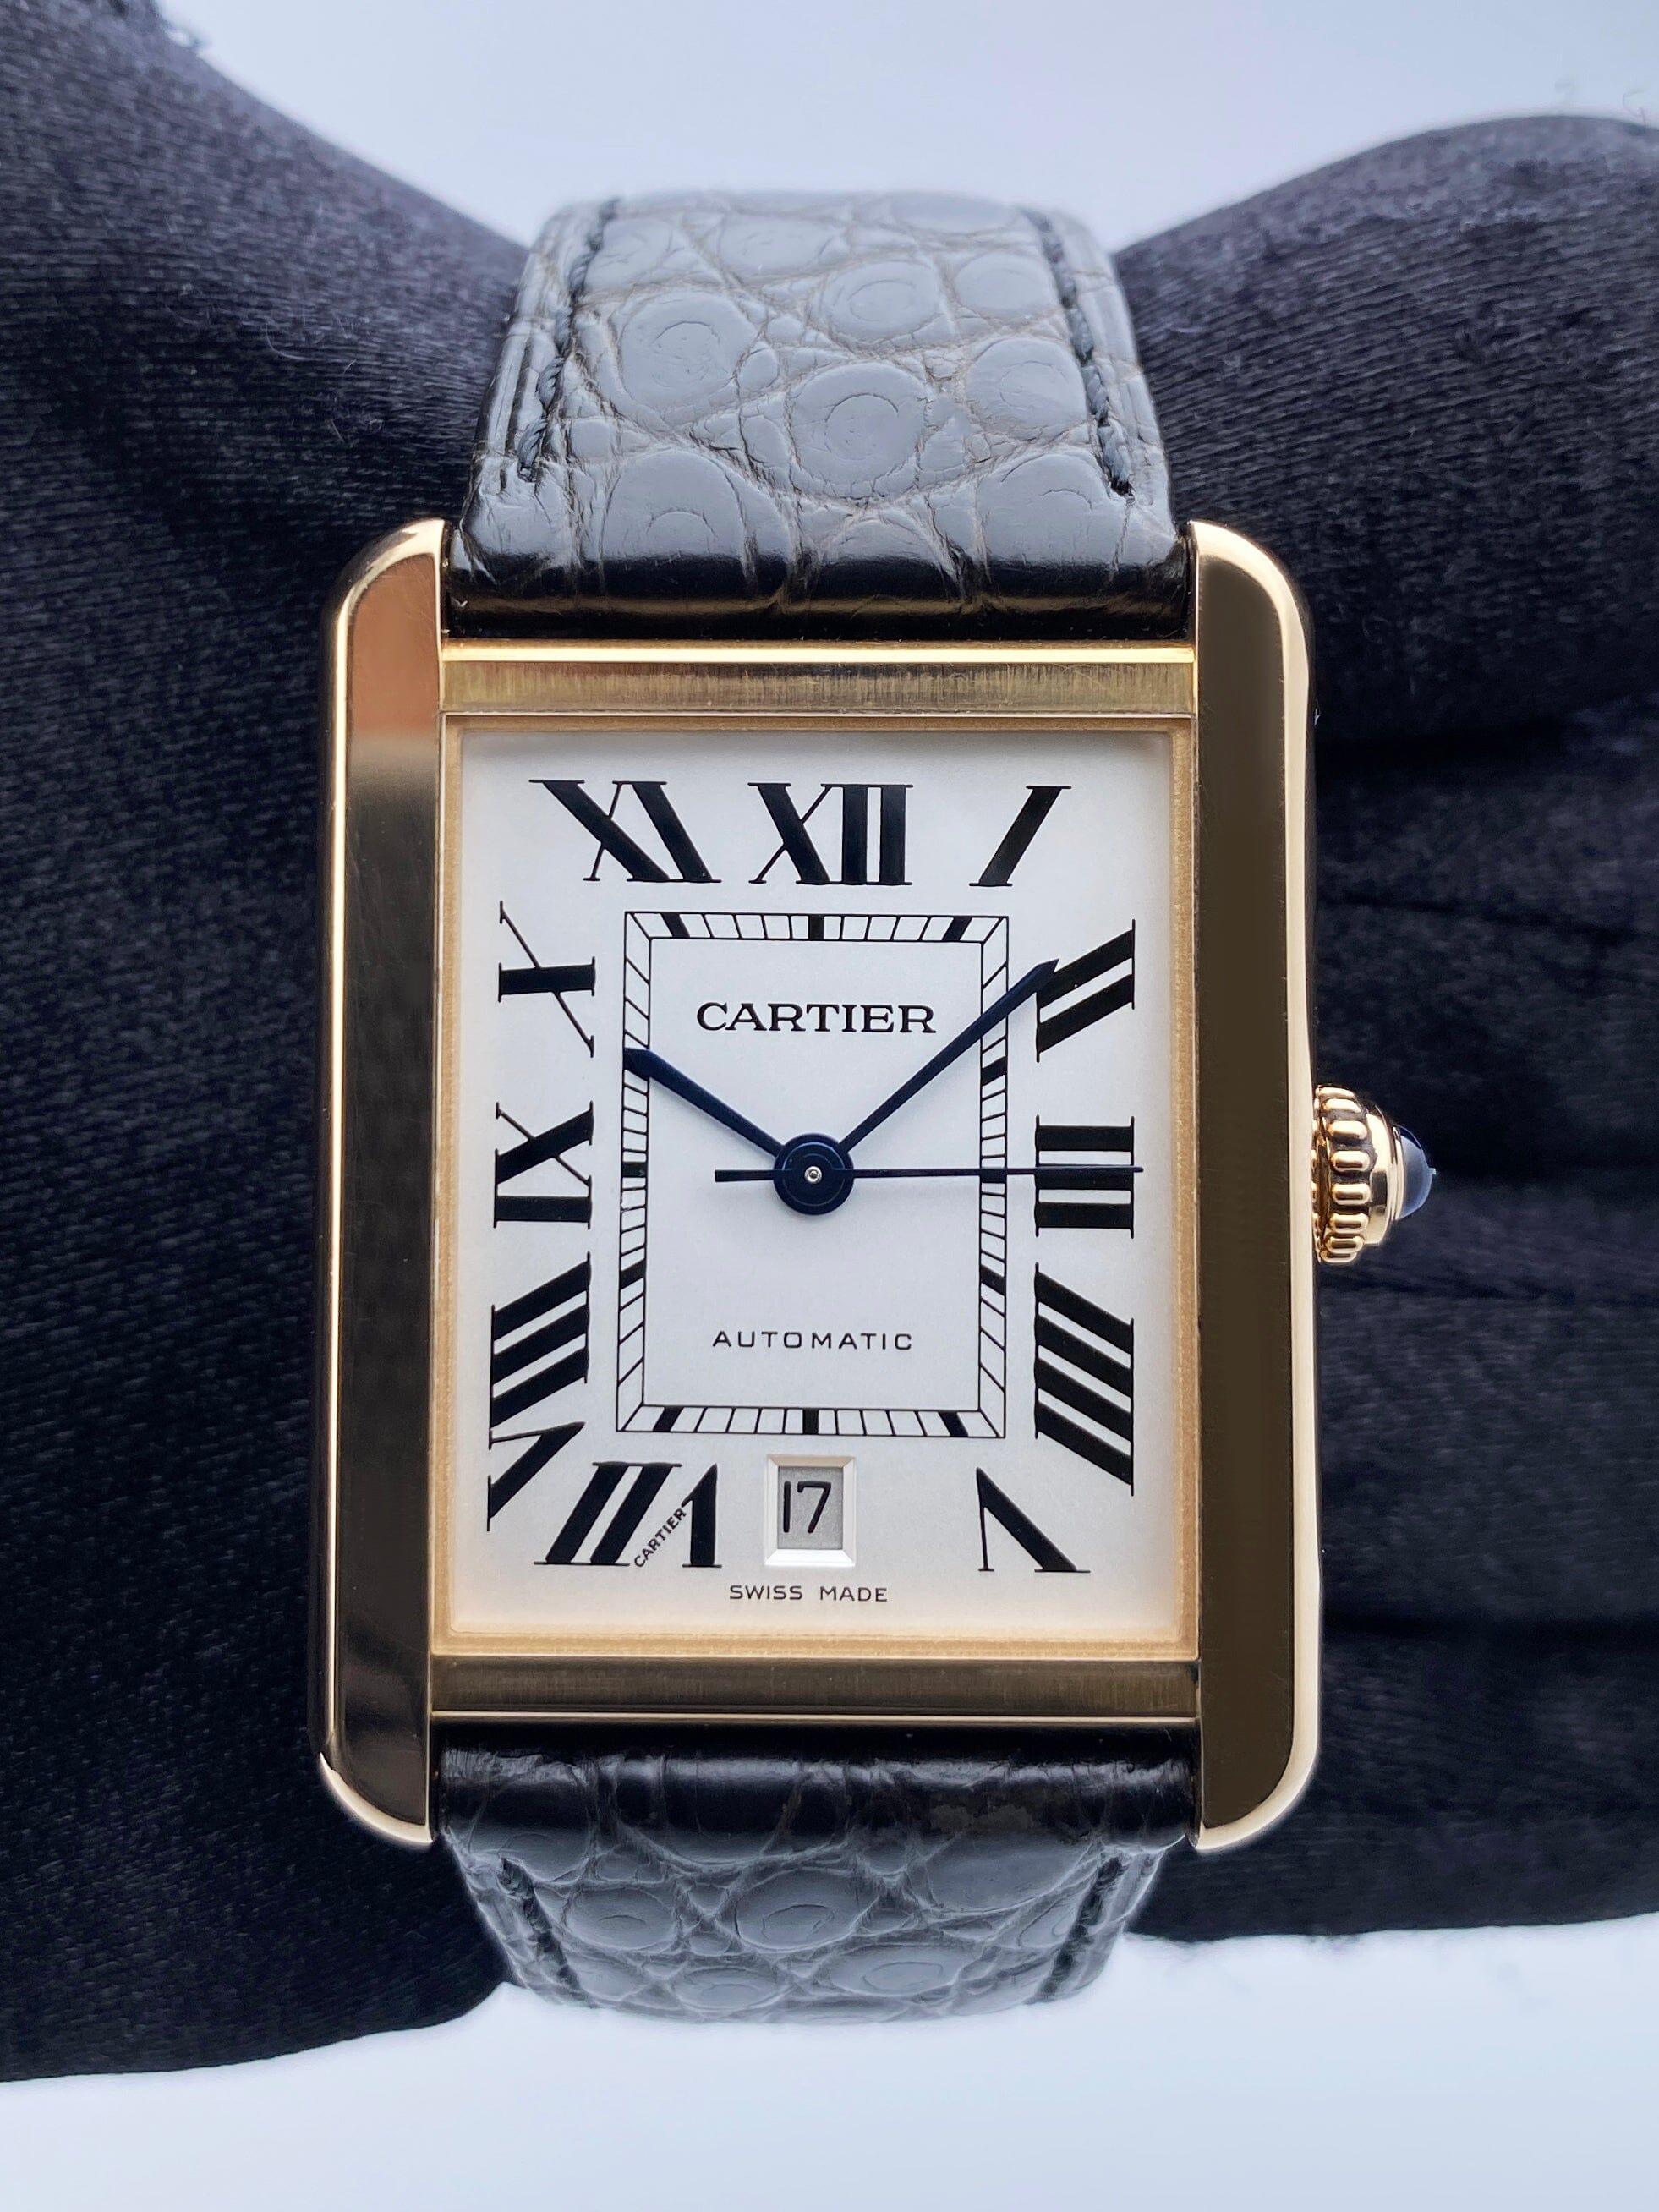 Cartier Tank Solo XL W5200026 / 3514 Mens Watch. 31mm 18K rose gold case with smoothed 18K rose gold bezel. Silver dial with blue steel hands and Roman numeral hour markers. Minute markers around an inner dial. Date display at the 6 o'clock